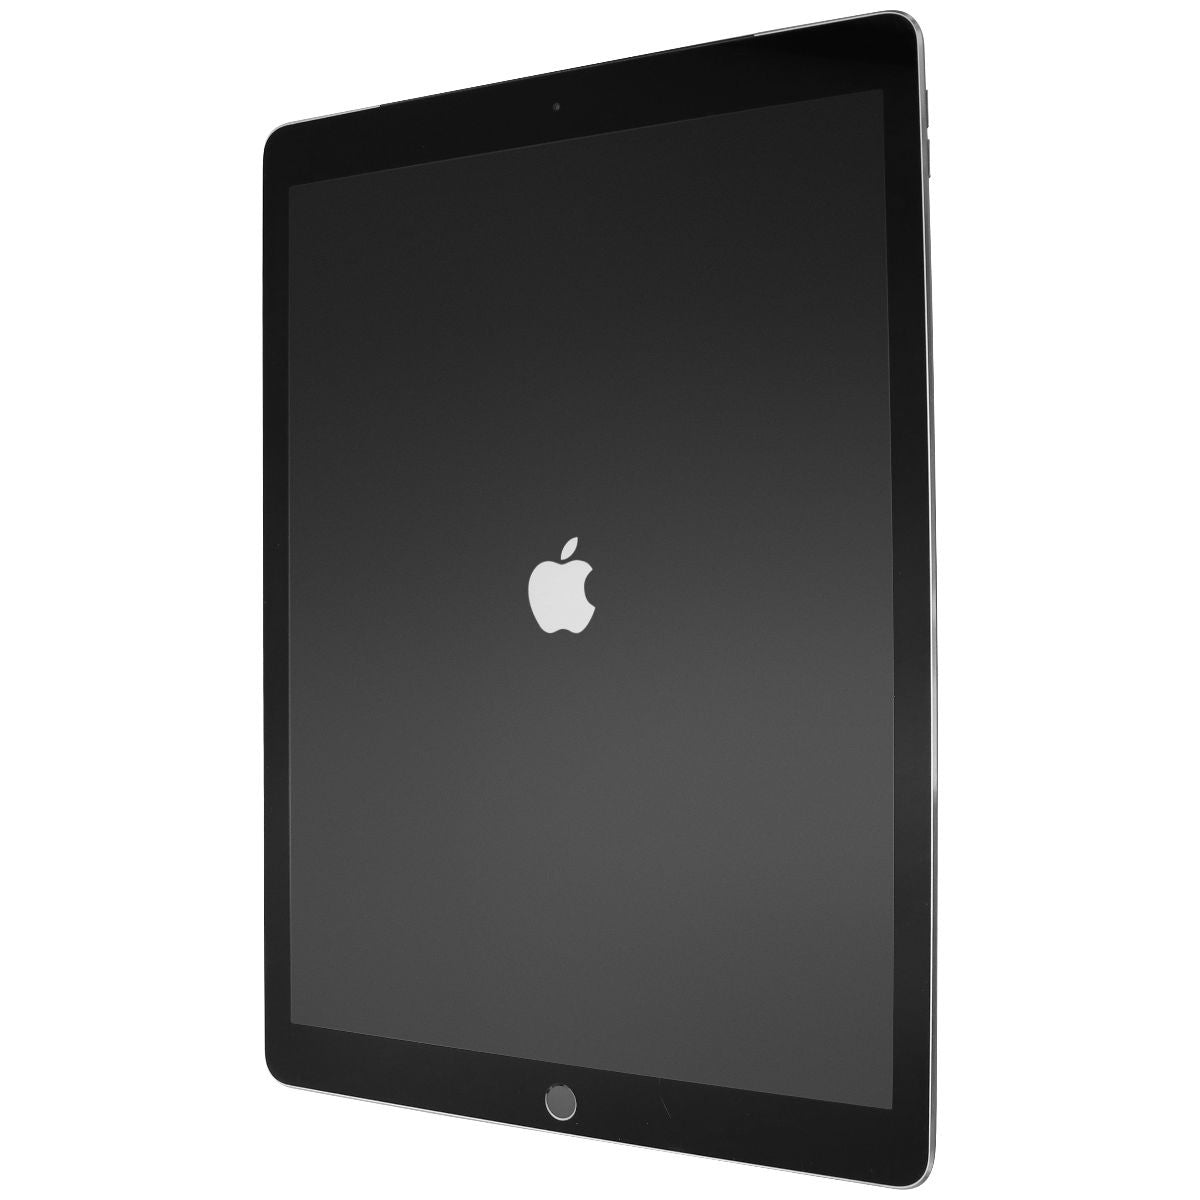 Apple iPad Pro 12.9-inch (1st Gen) Tablet A1652 (GSM + CDMA) - 256GB/Space Gray iPads, Tablets & eBook Readers Apple    - Simple Cell Bulk Wholesale Pricing - USA Seller